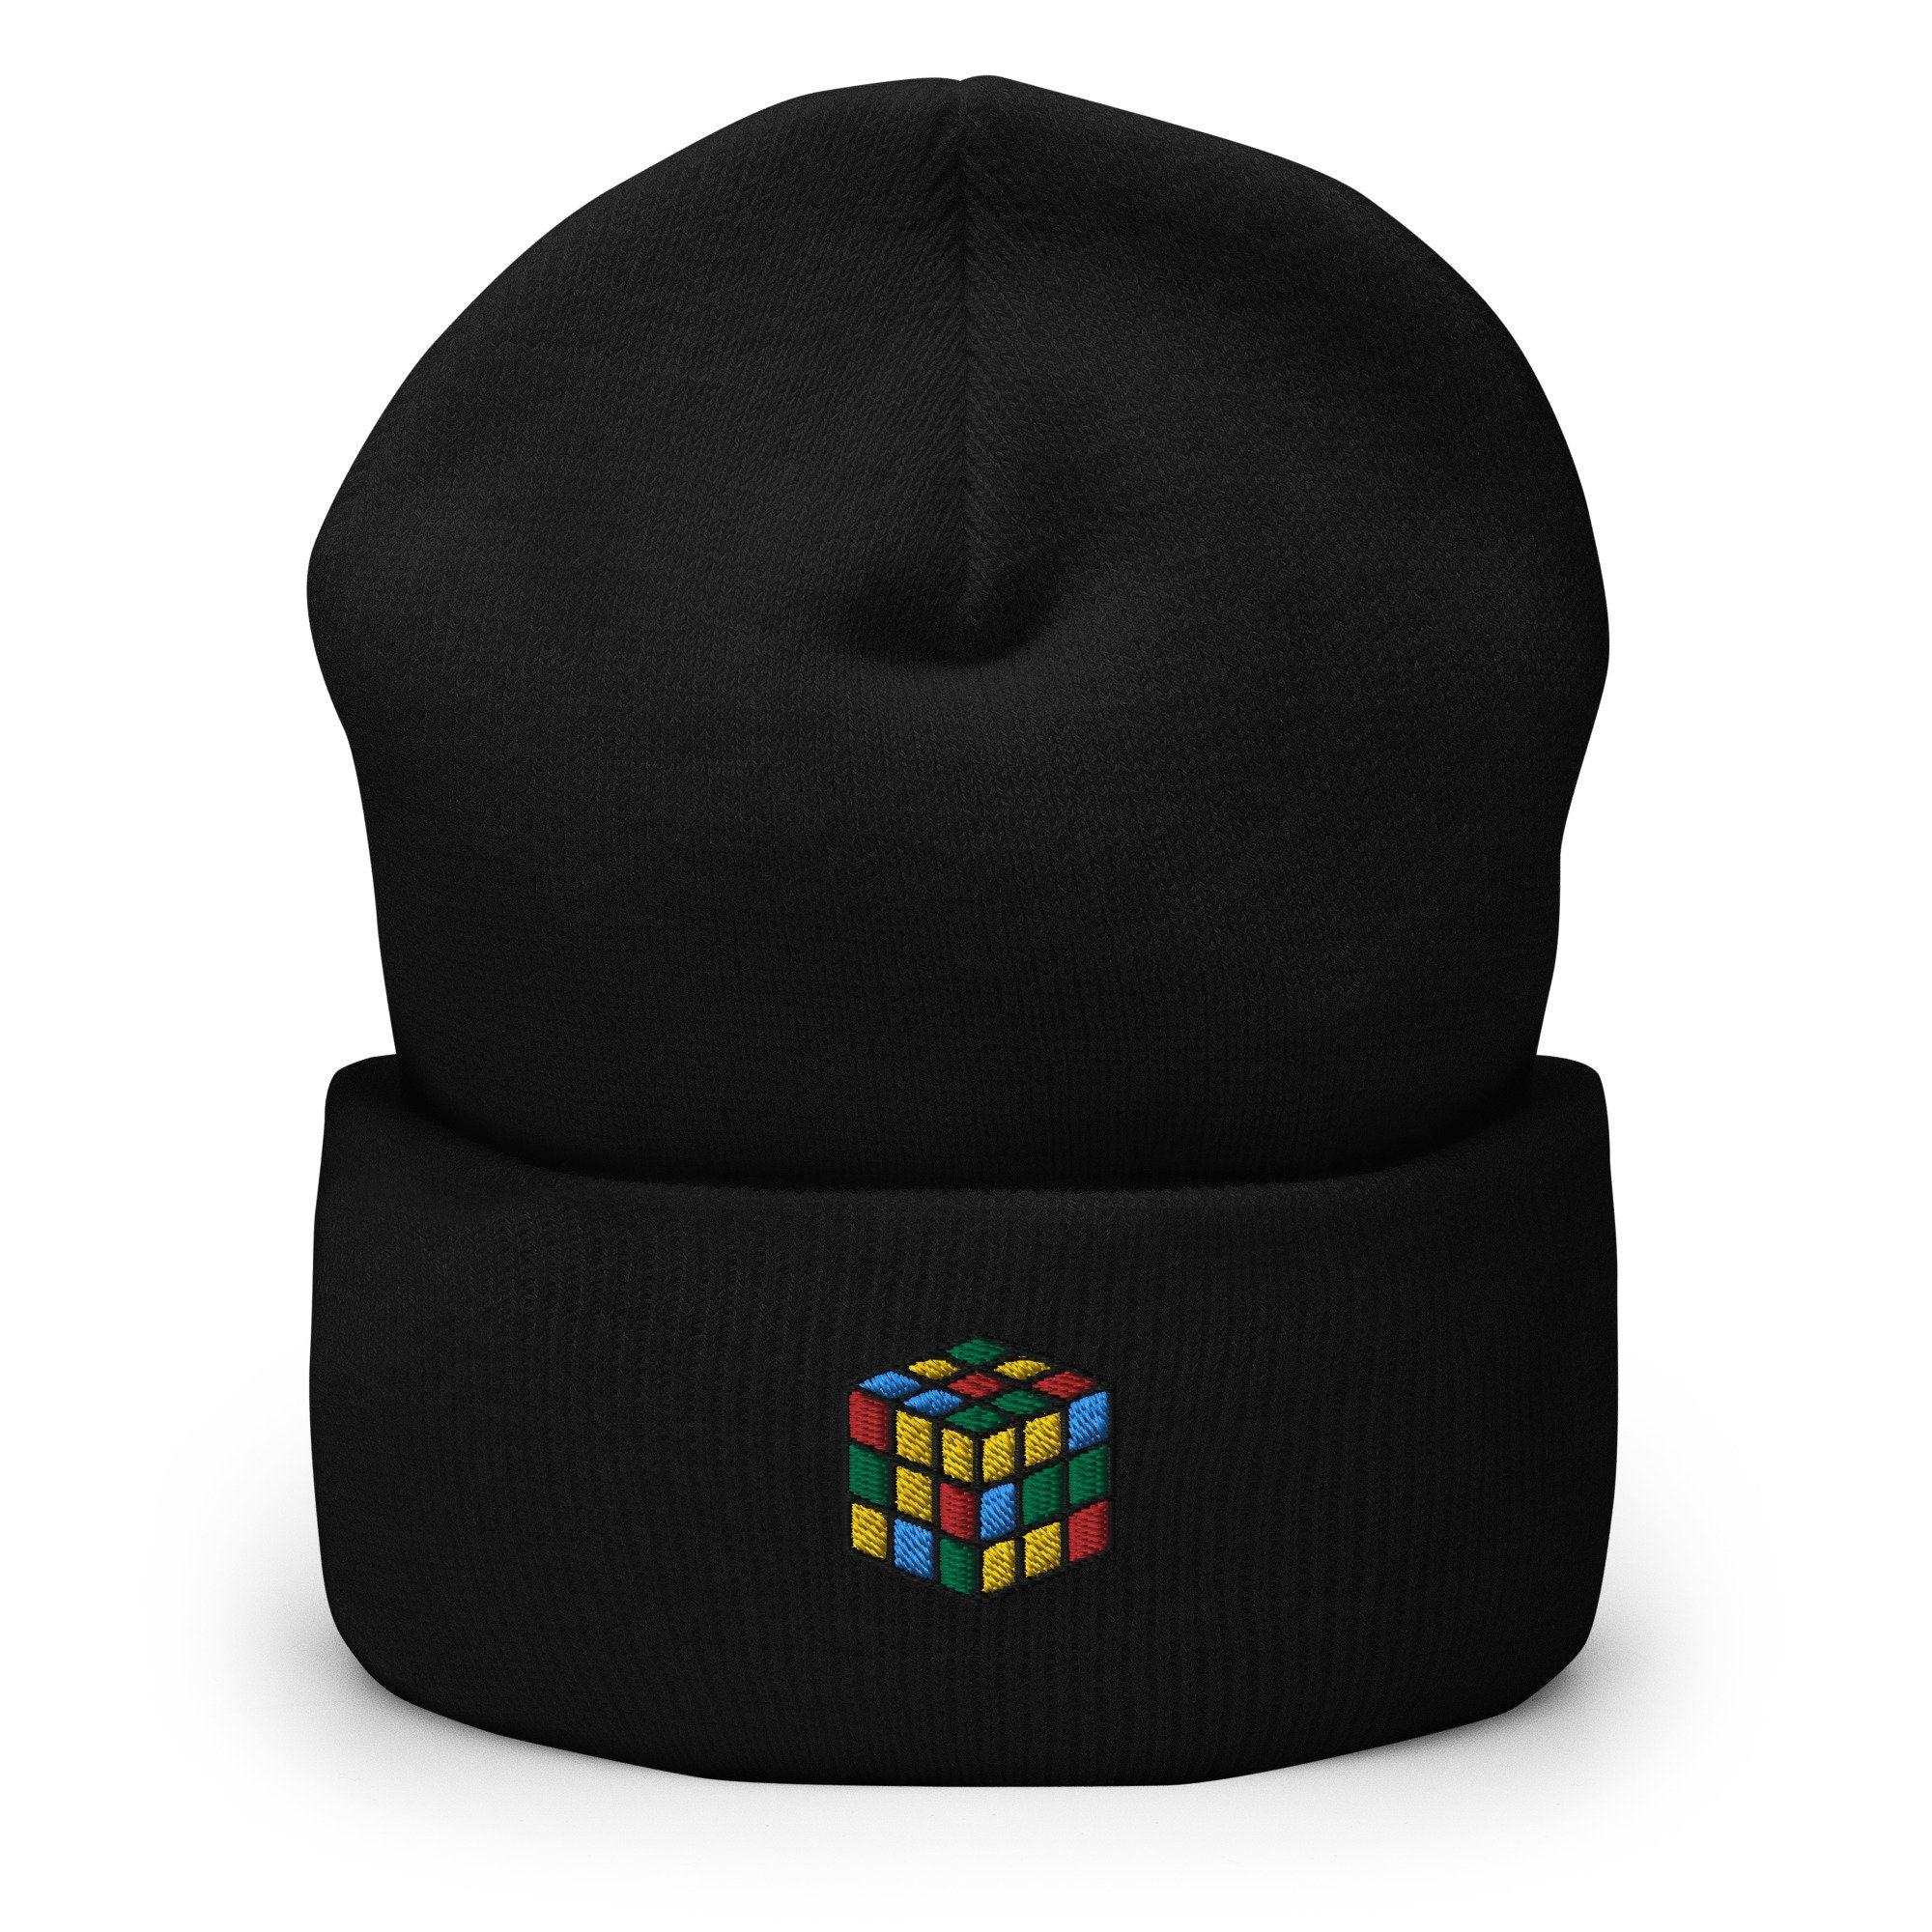 Rubik's Cube Puzzle Embroidered Beanie, Handmade Cuffed Knit Unisex Slouchy Adult Winter Hat Cap Gift